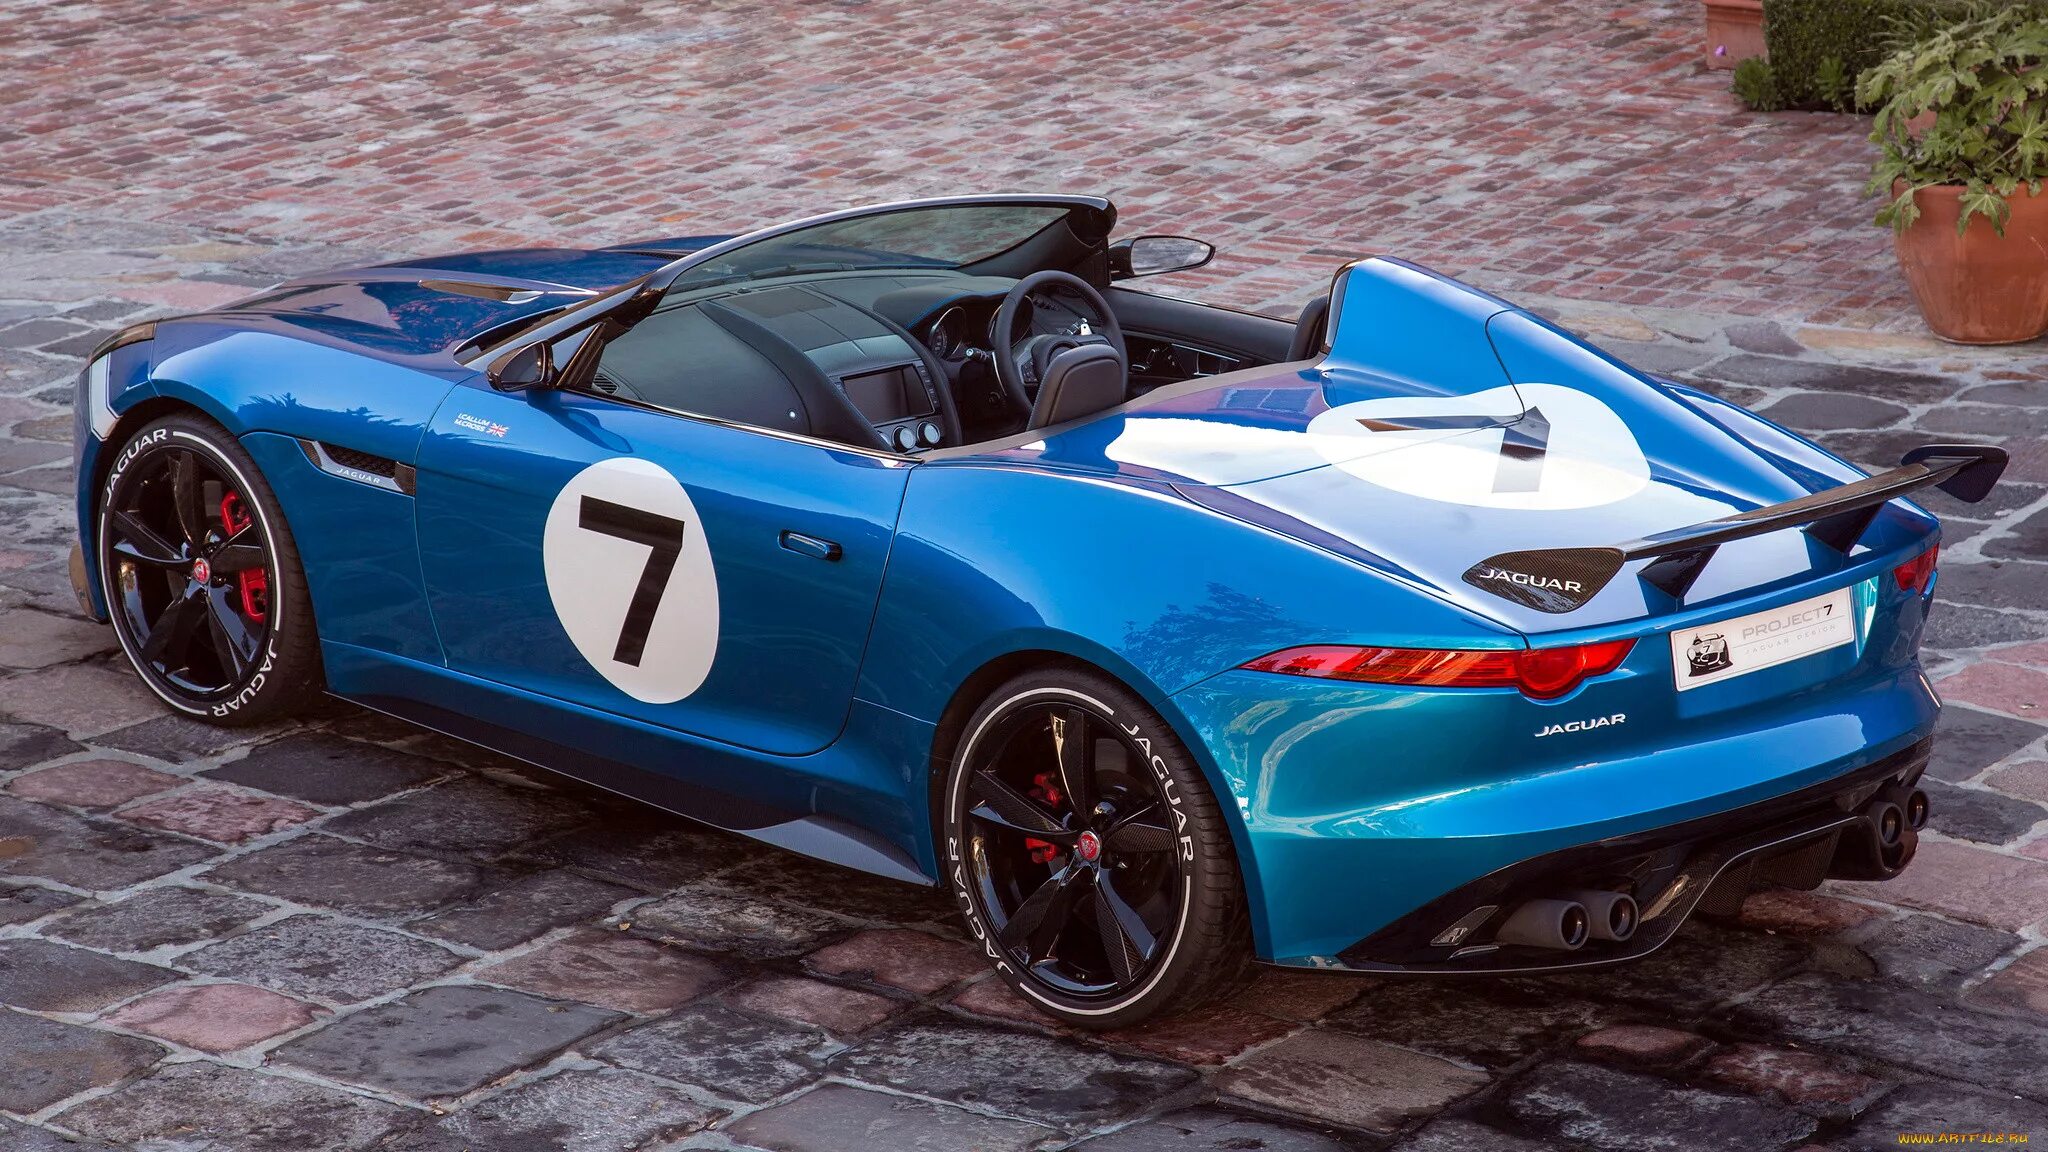 Jaguar Project 7. Jaguar f-Type Project 7. Jaguar 007. 15 Jaguar f- Type Project 7 hotwels.